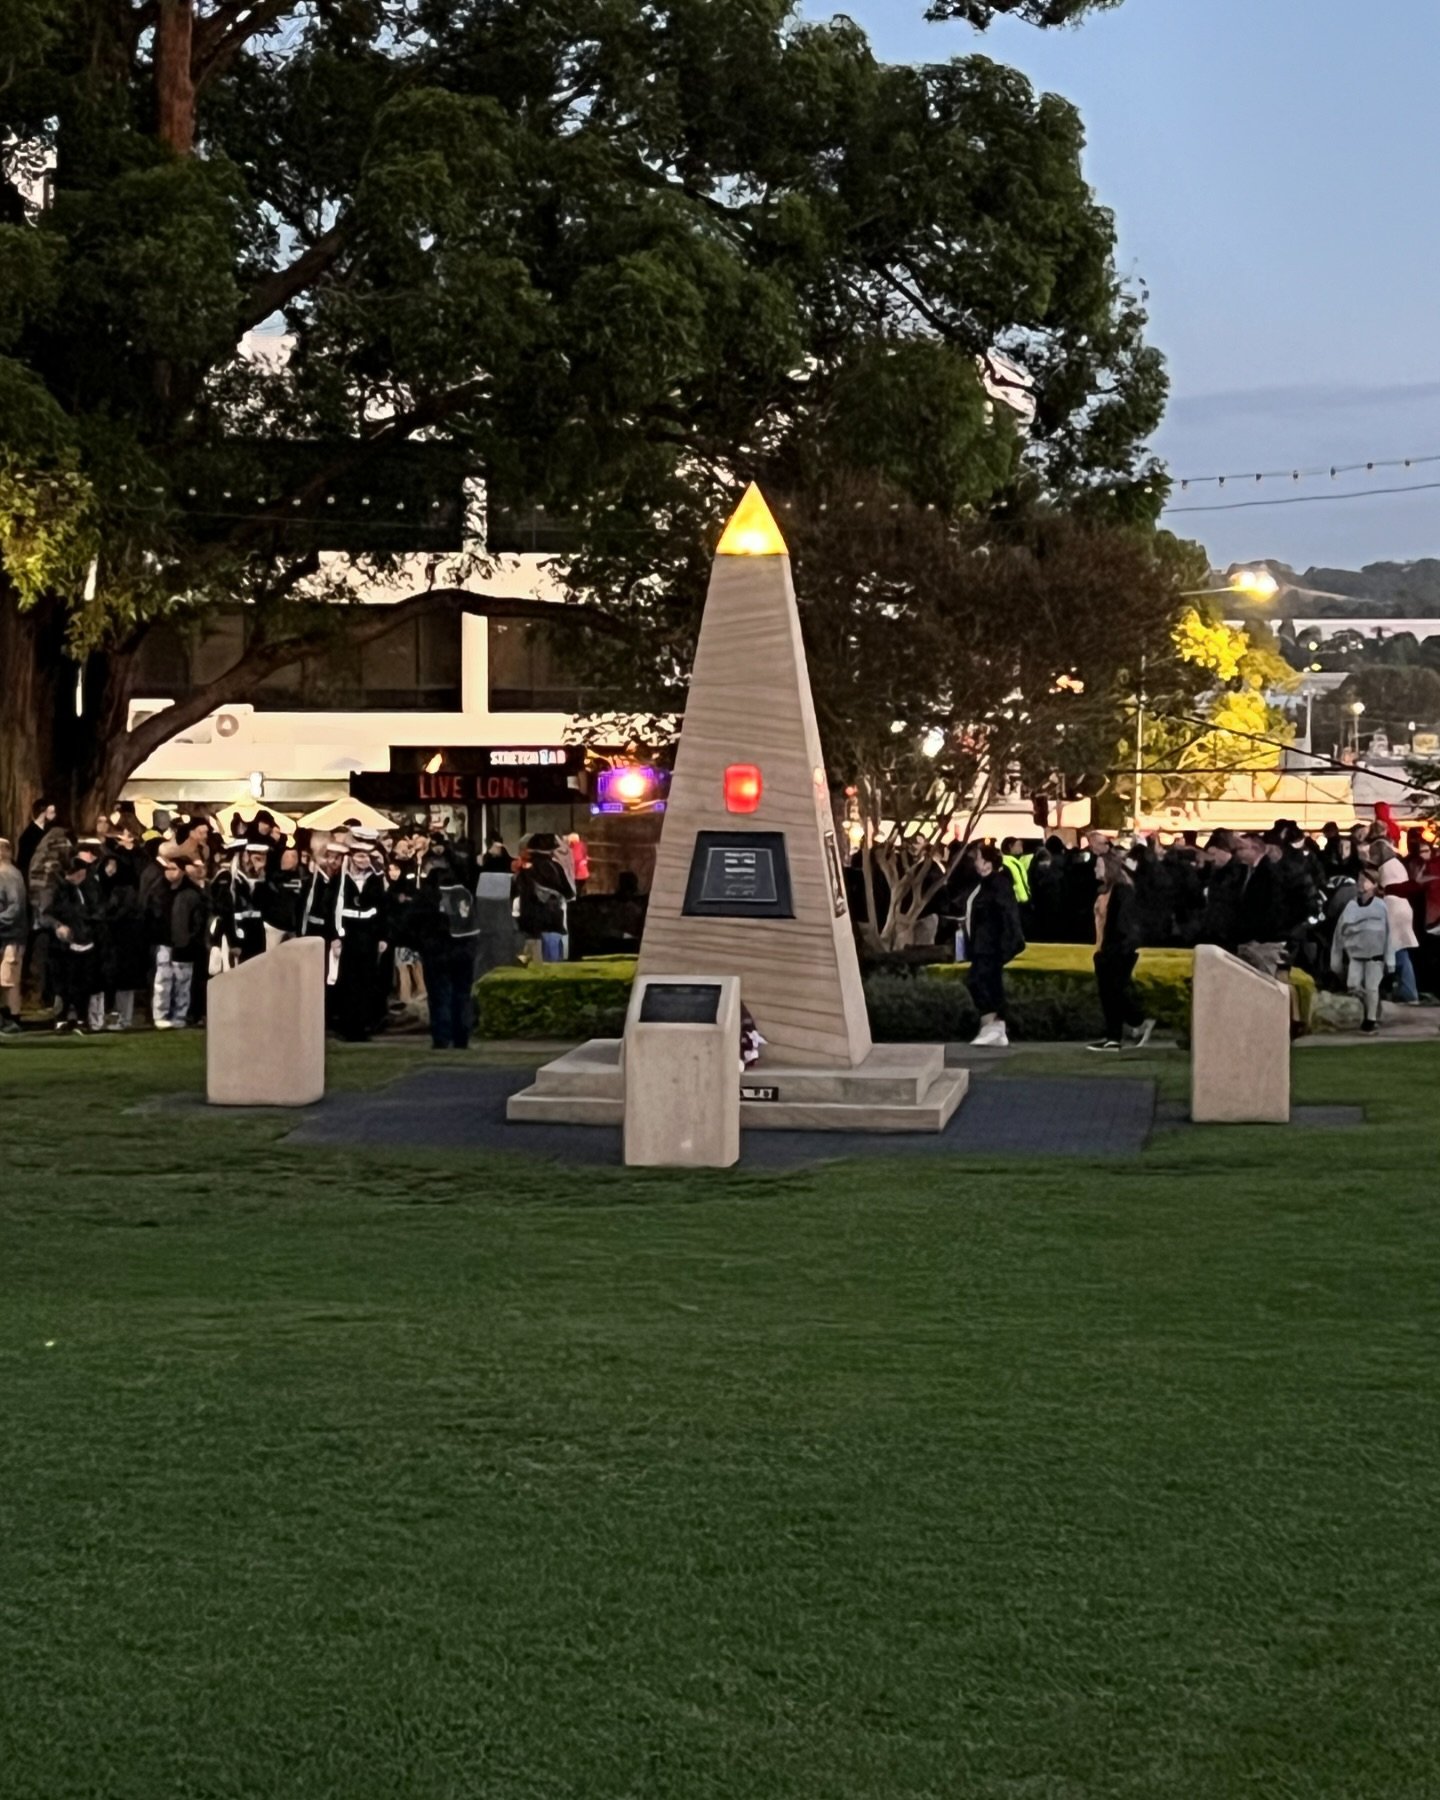 There isn&rsquo;t a prouder day on the calendar to be an #aussie 
Anzac Day is the pinnacle of pride and patriotism for all Australians and New Zealanders 🇦🇺🇳🇿🦘
Stand up and be proud of the men and women who made the ultimate sacrifice for us! 
